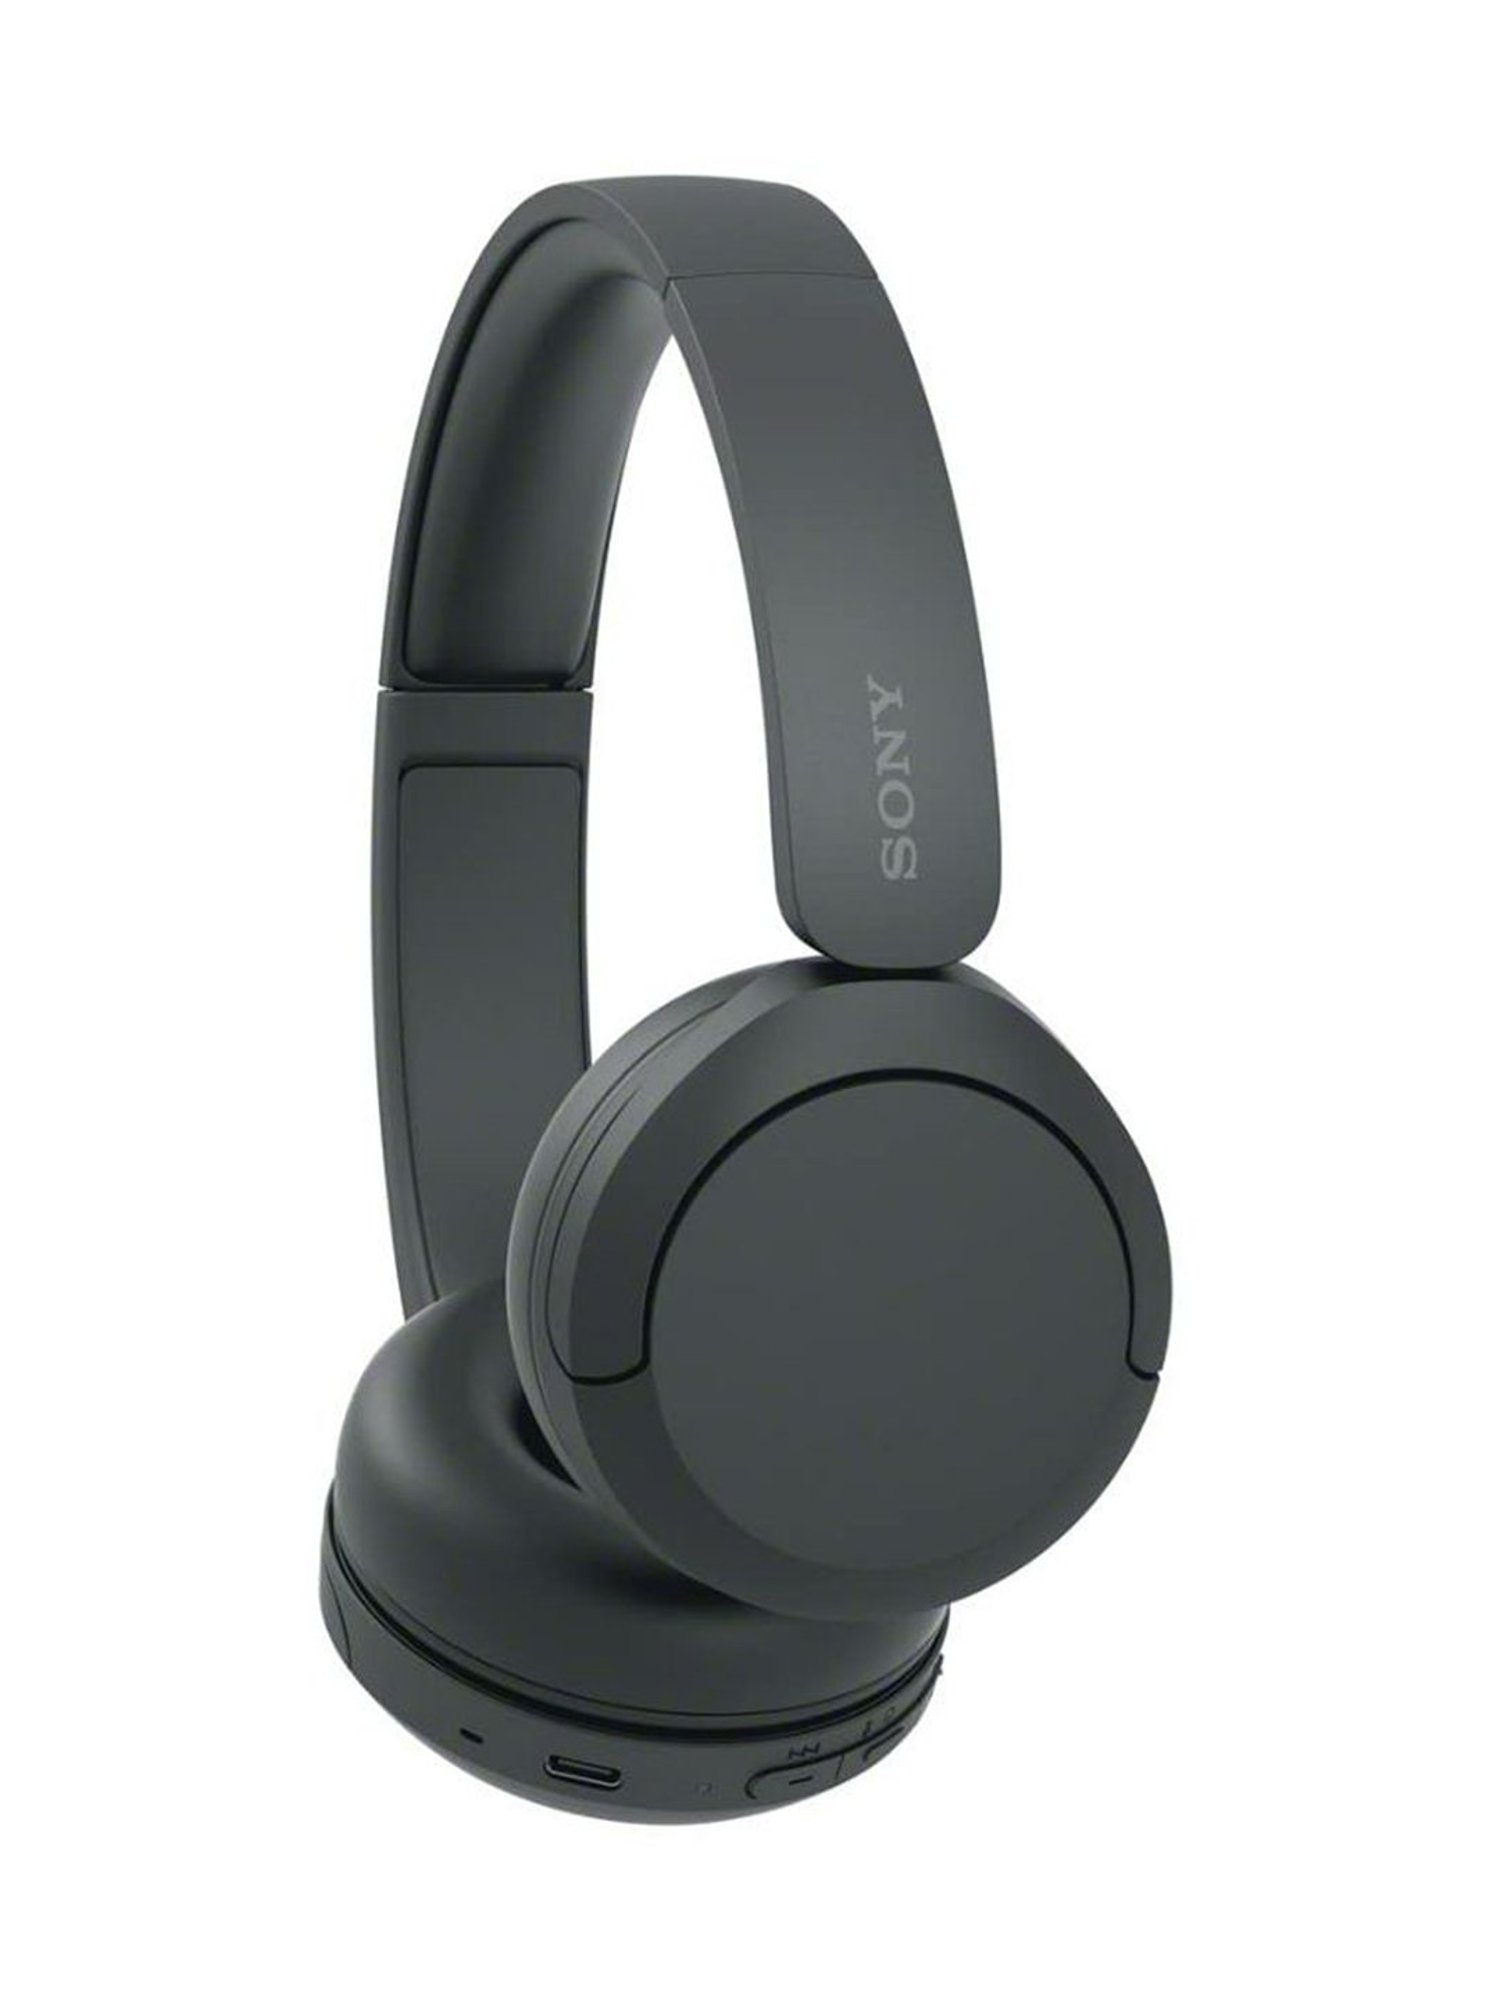 Sony WH-CH520 Compact Easy Carrying Wireless Bluetooth On-Ear Headphones  (Black) Bundle with Knox Gear Metal Headphone Stand (2 Items)